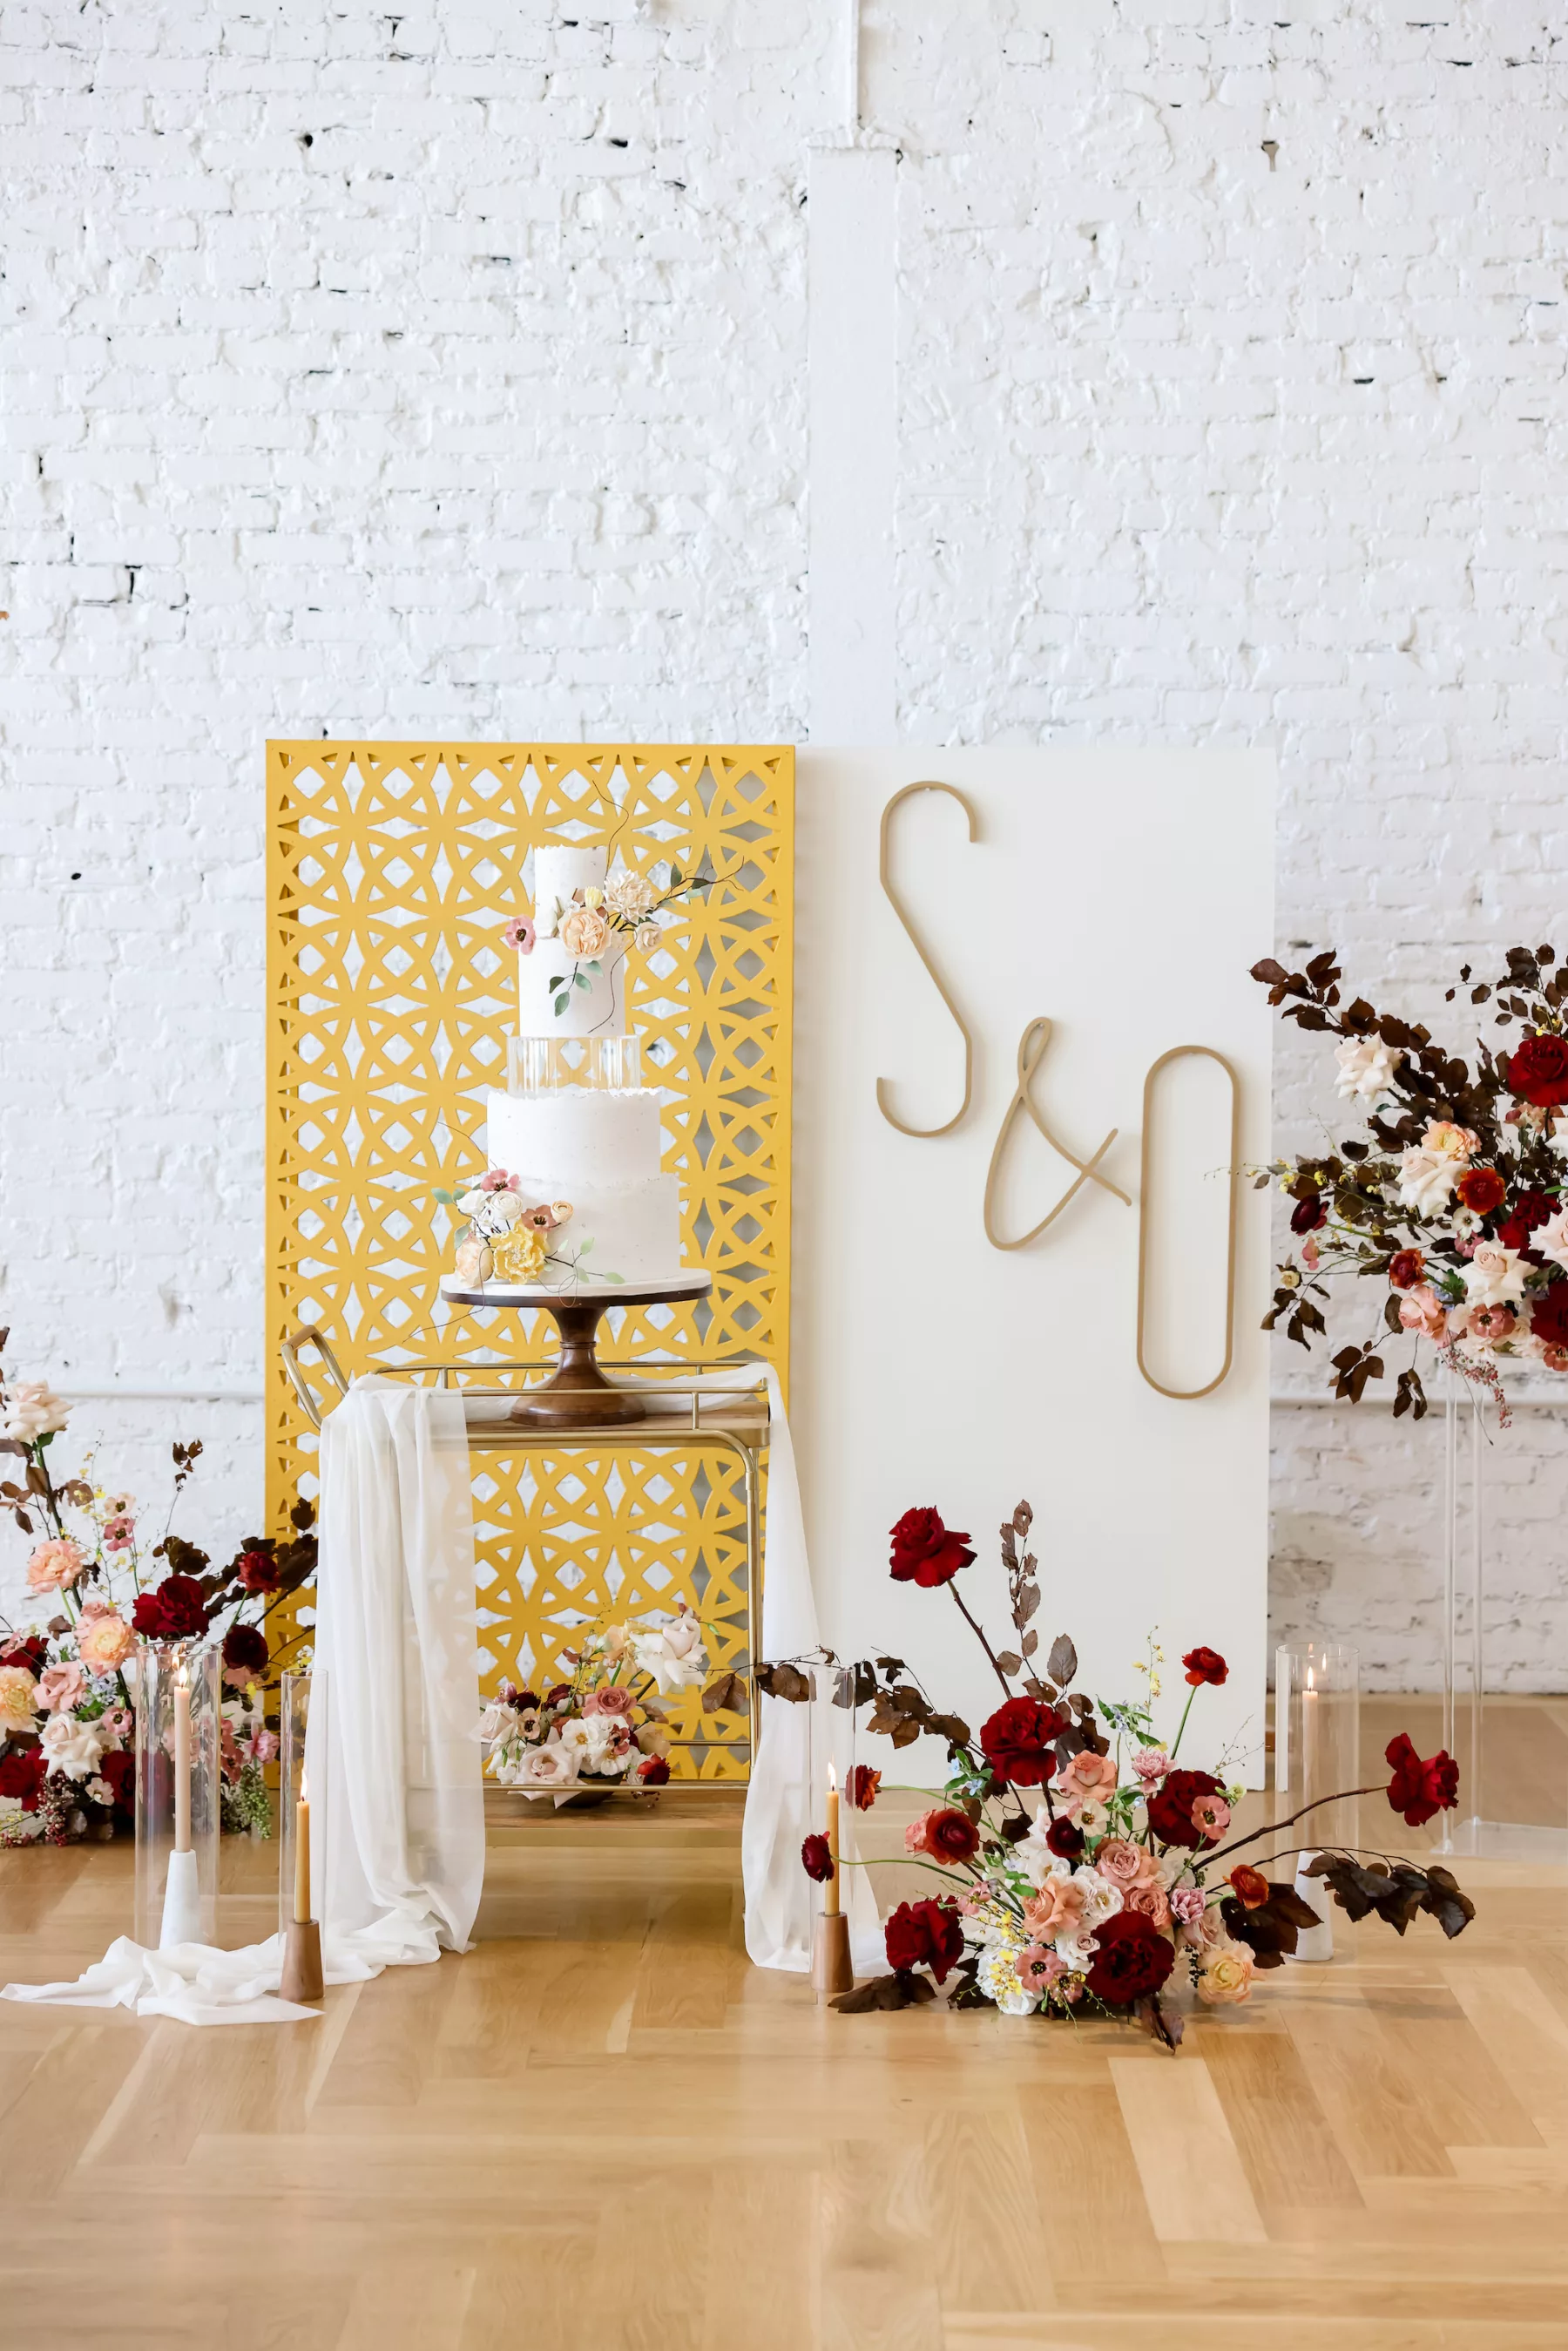 Red and Yellow Retro Wedding Cake table Decor Ideas | Whimsical Red, Pink, and White Rose Floral Decor Ideas | Ybor Planner Blue Skies Events